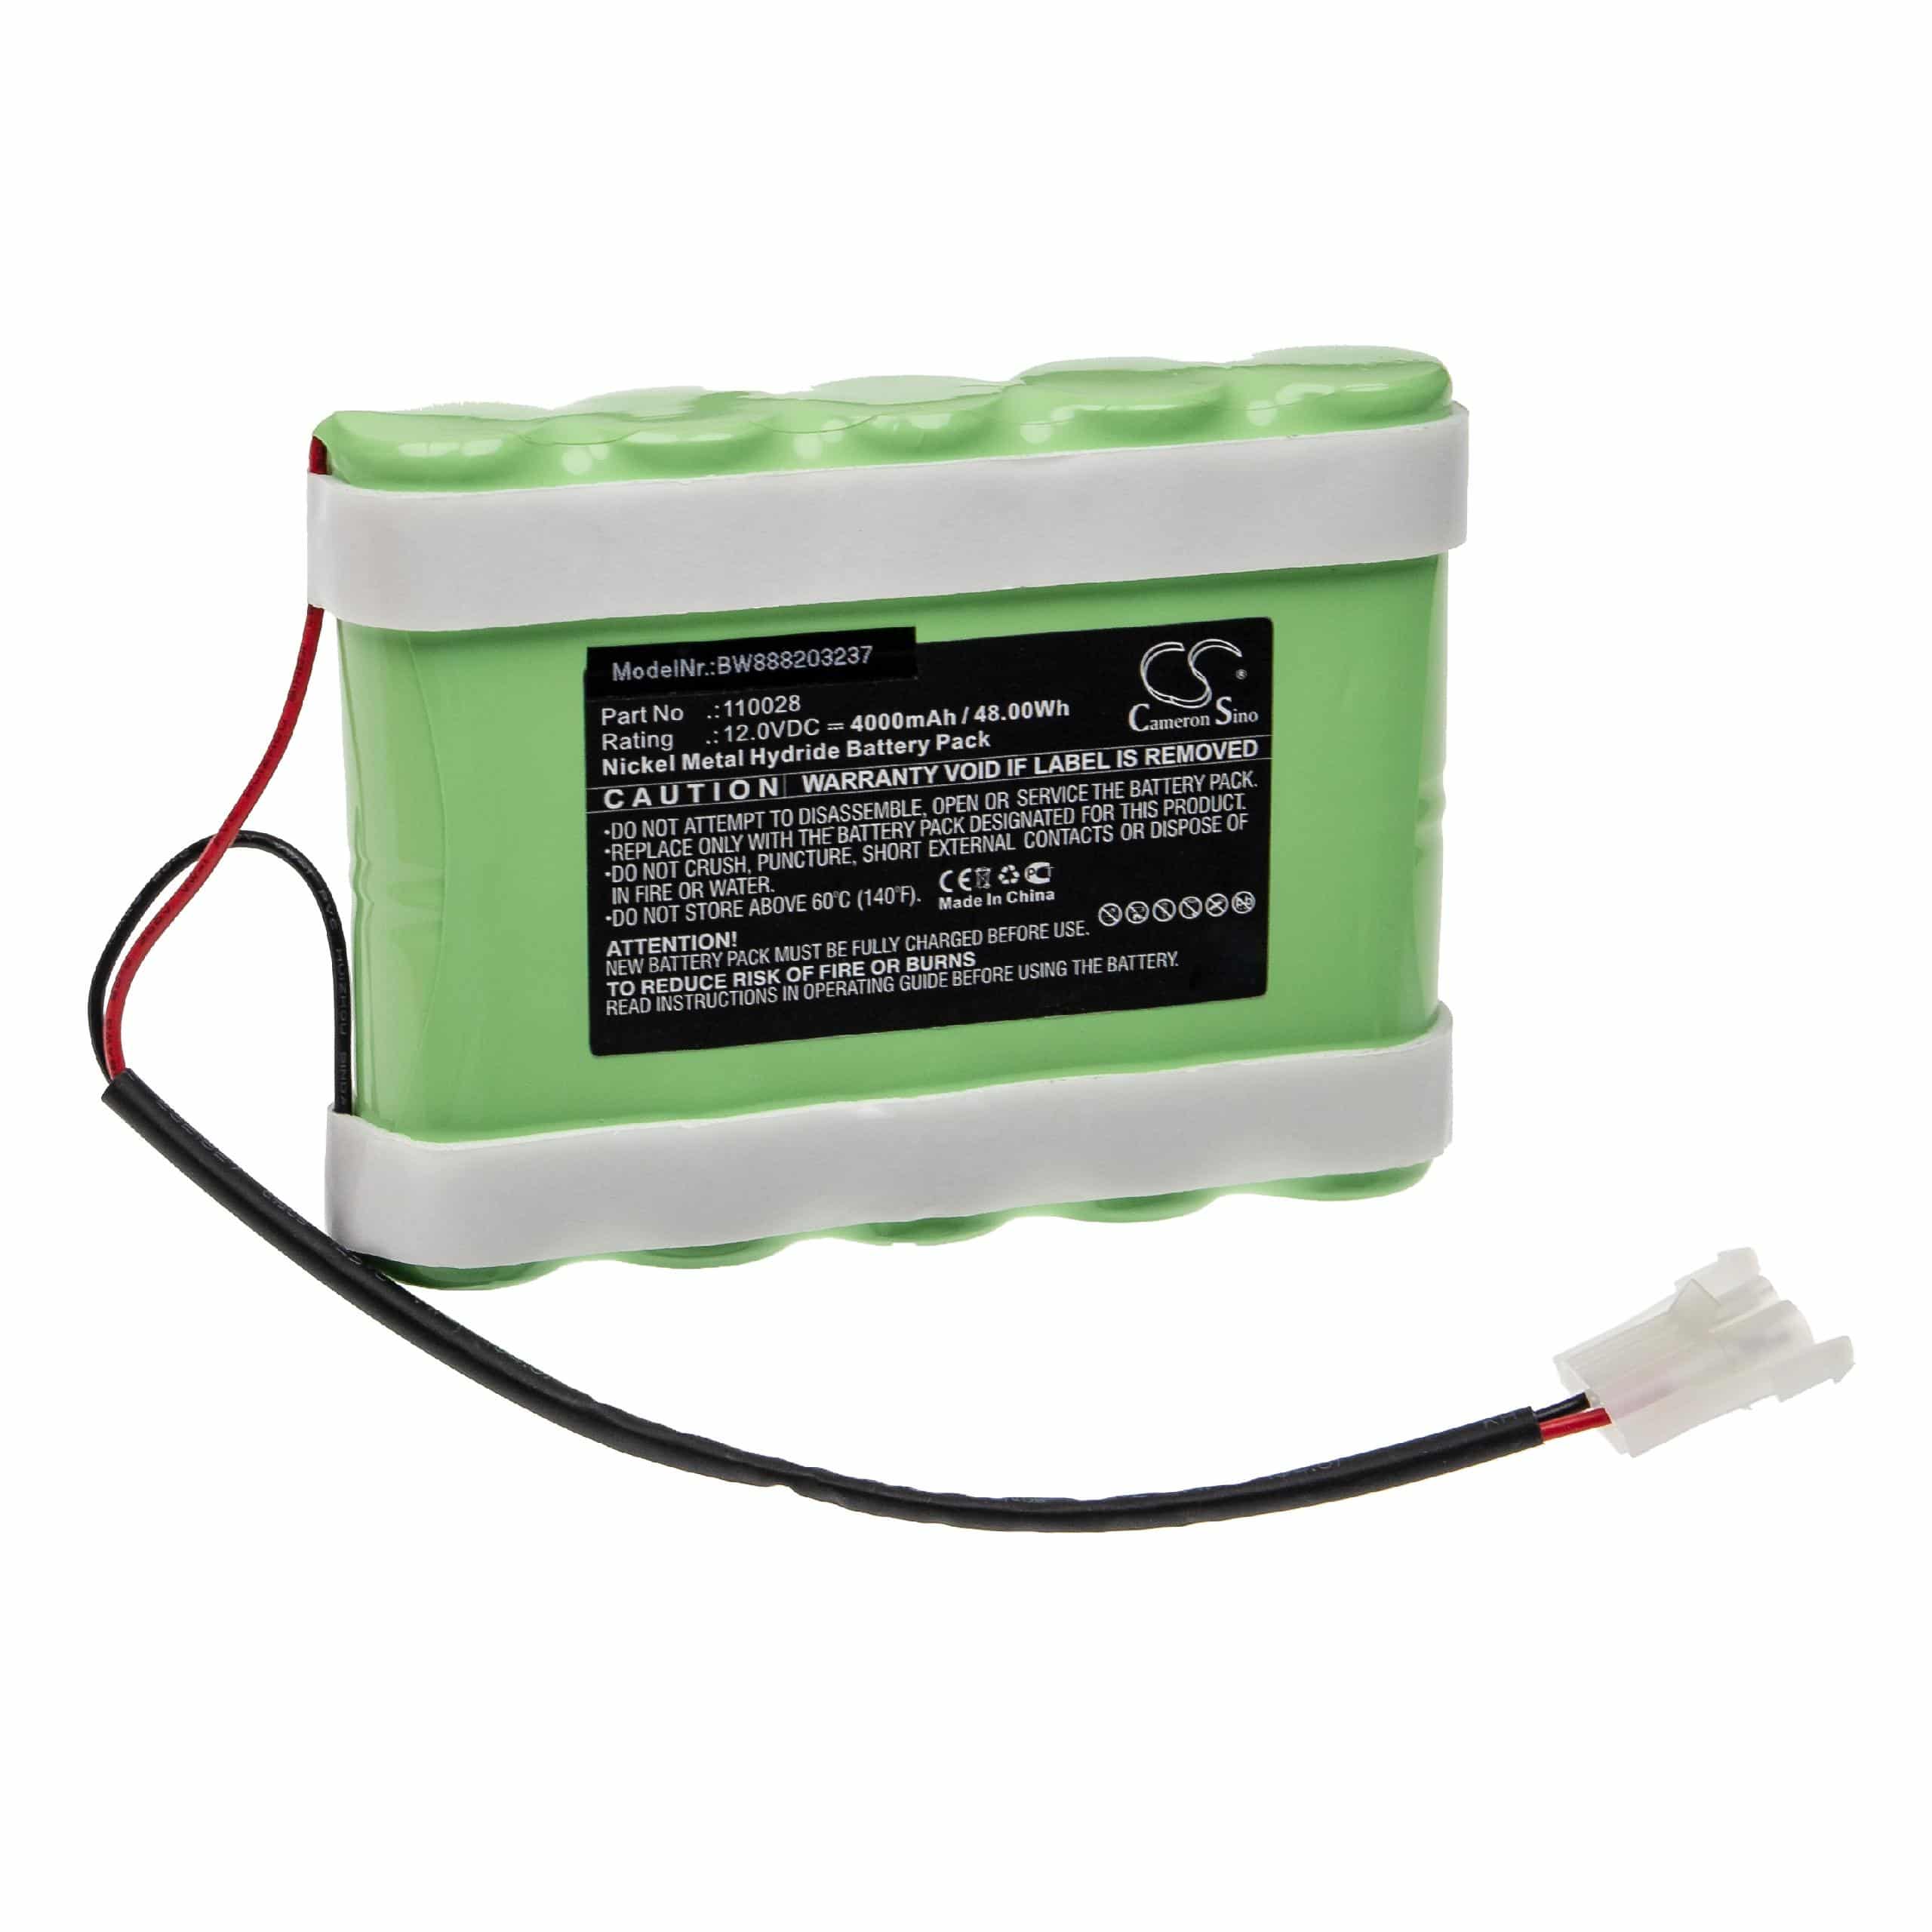 Medical Equipment Battery Replacement for Hellige 110028 - 4000mAh 12V NiMH